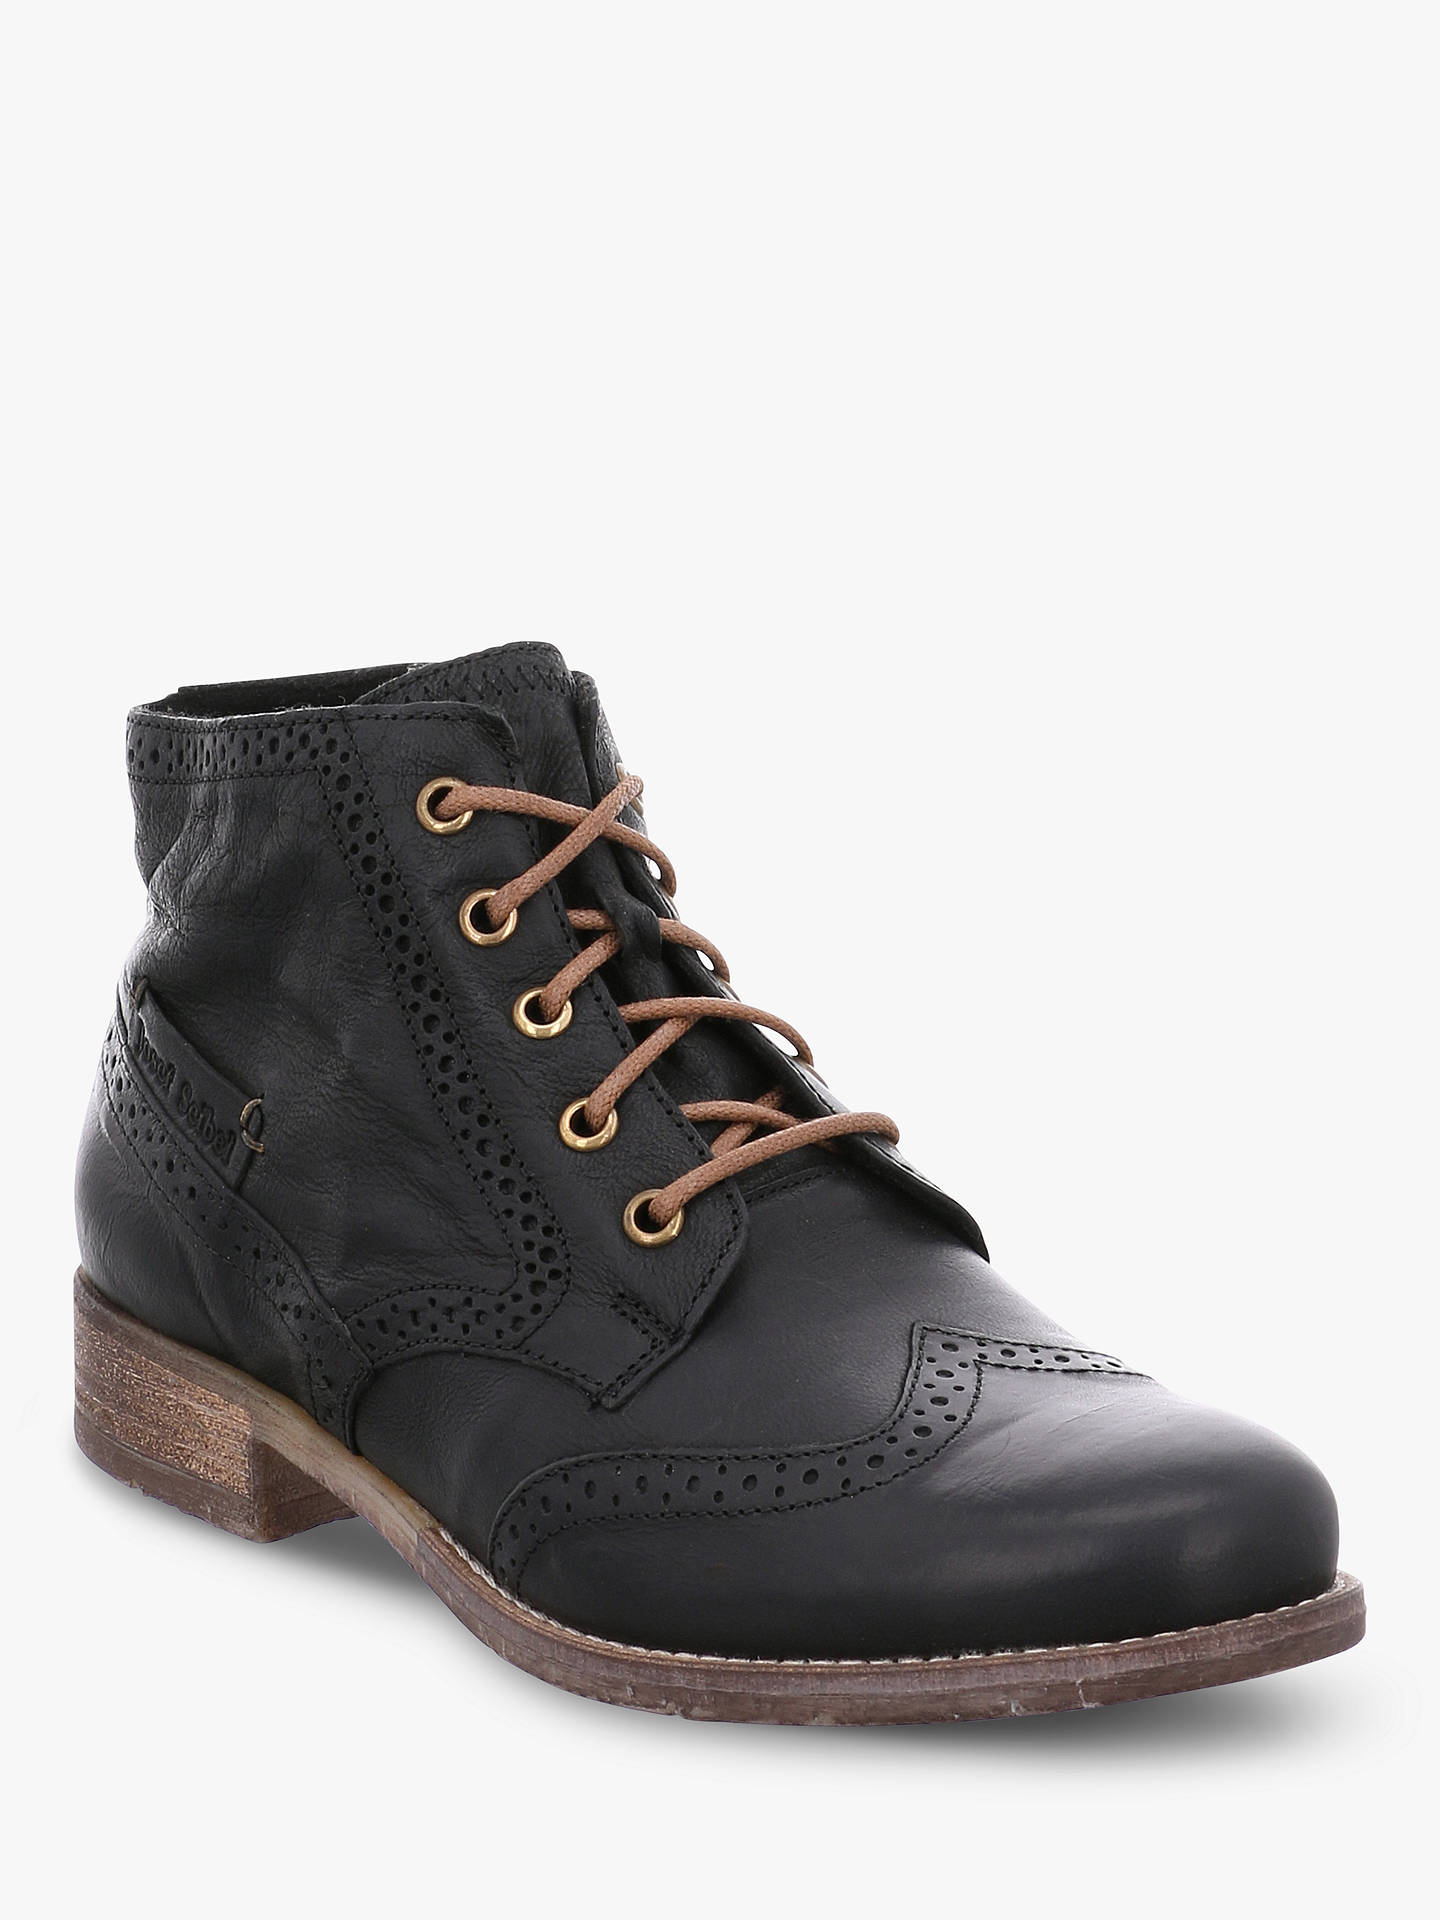 Josef Seibel Sienna 15 Lace Up Ankle Boots at John Lewis & Partners